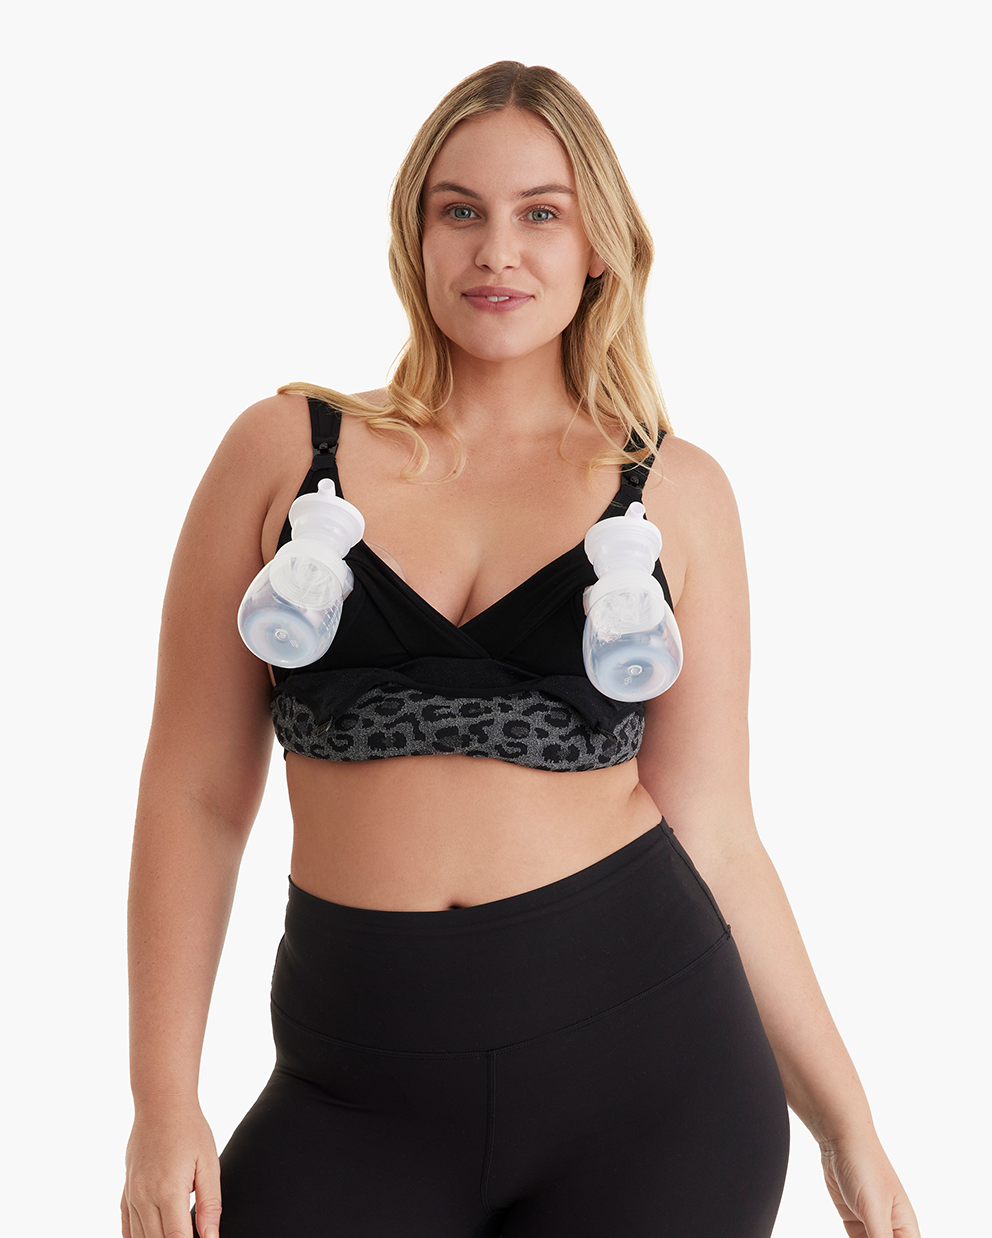 S12 Pro Bra Bundle: Double S12 Pro Wearable Breast Pump and Supermom Bra for Nursing and Pumping